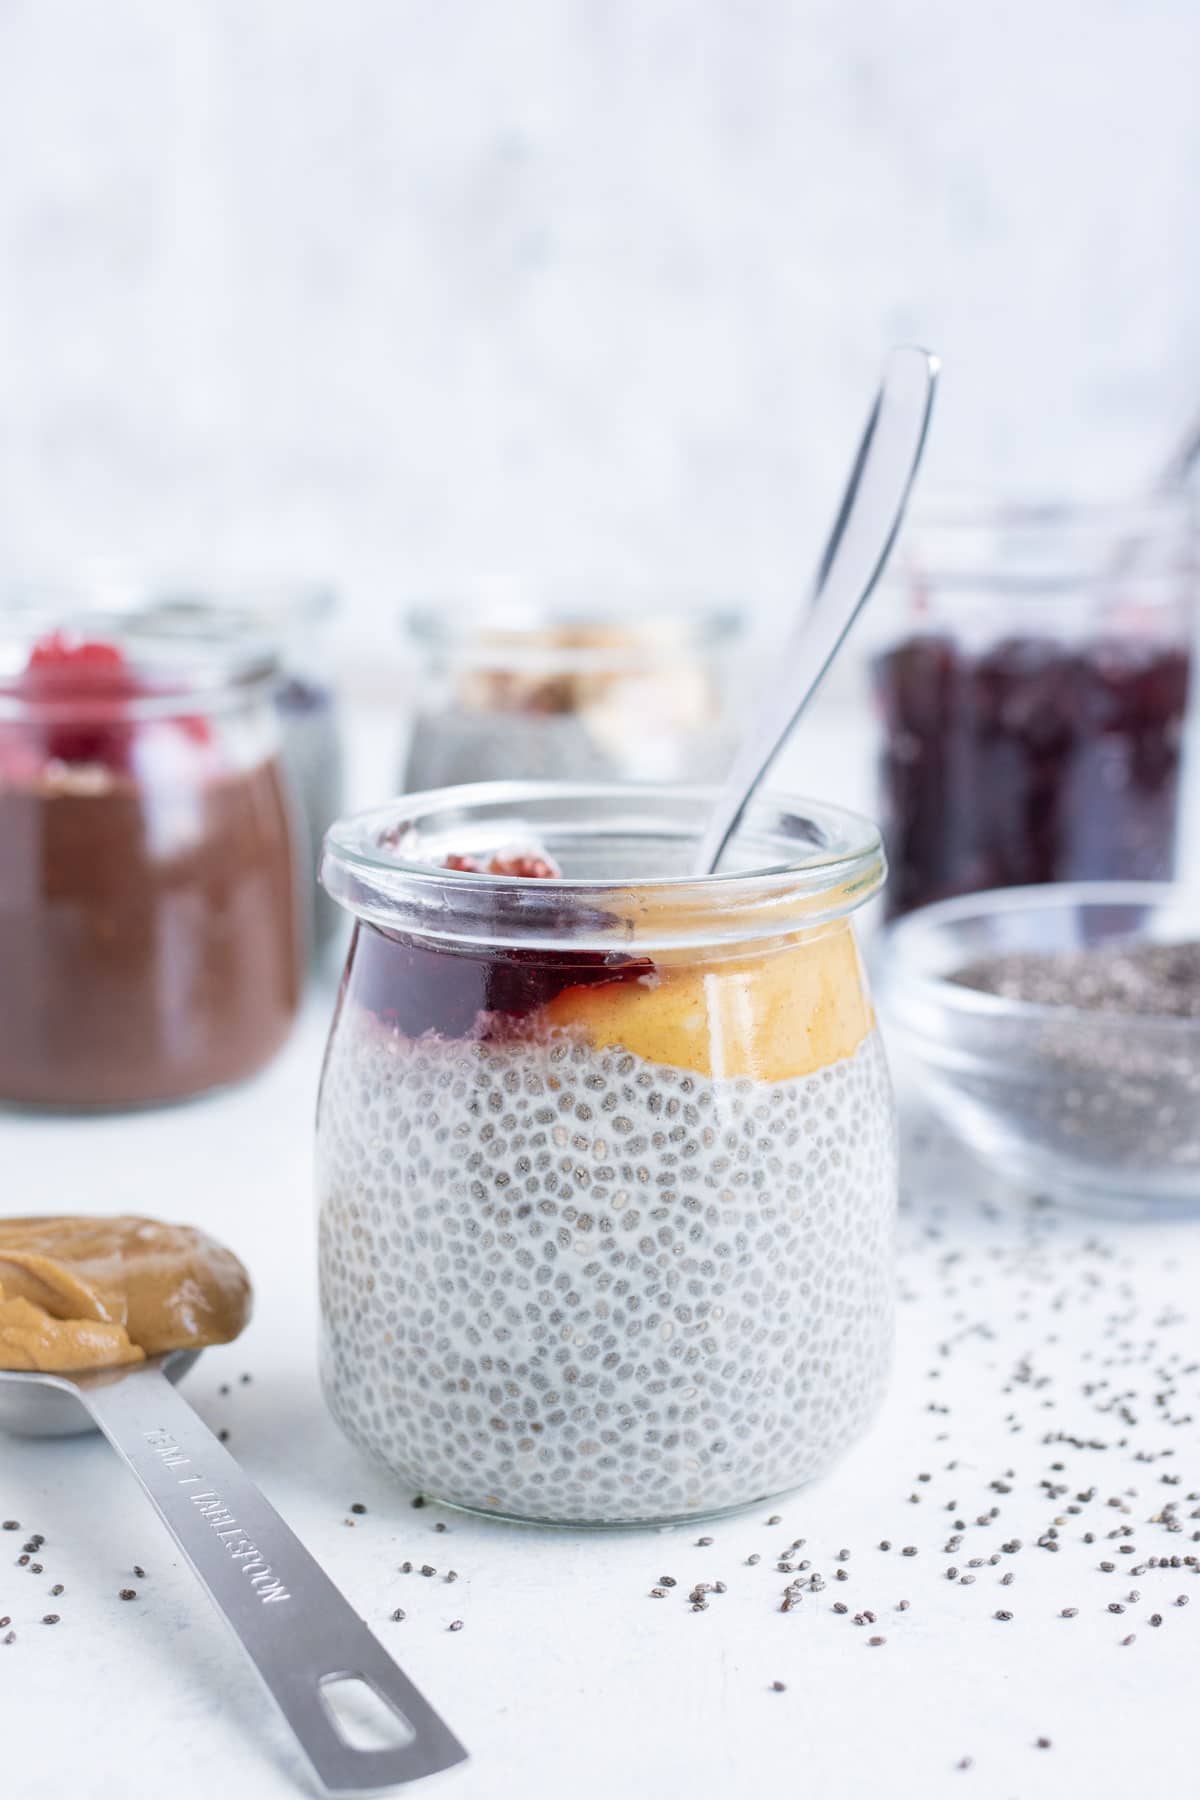 Peanut butter and jelly chia seed pudding is shown on the counter.